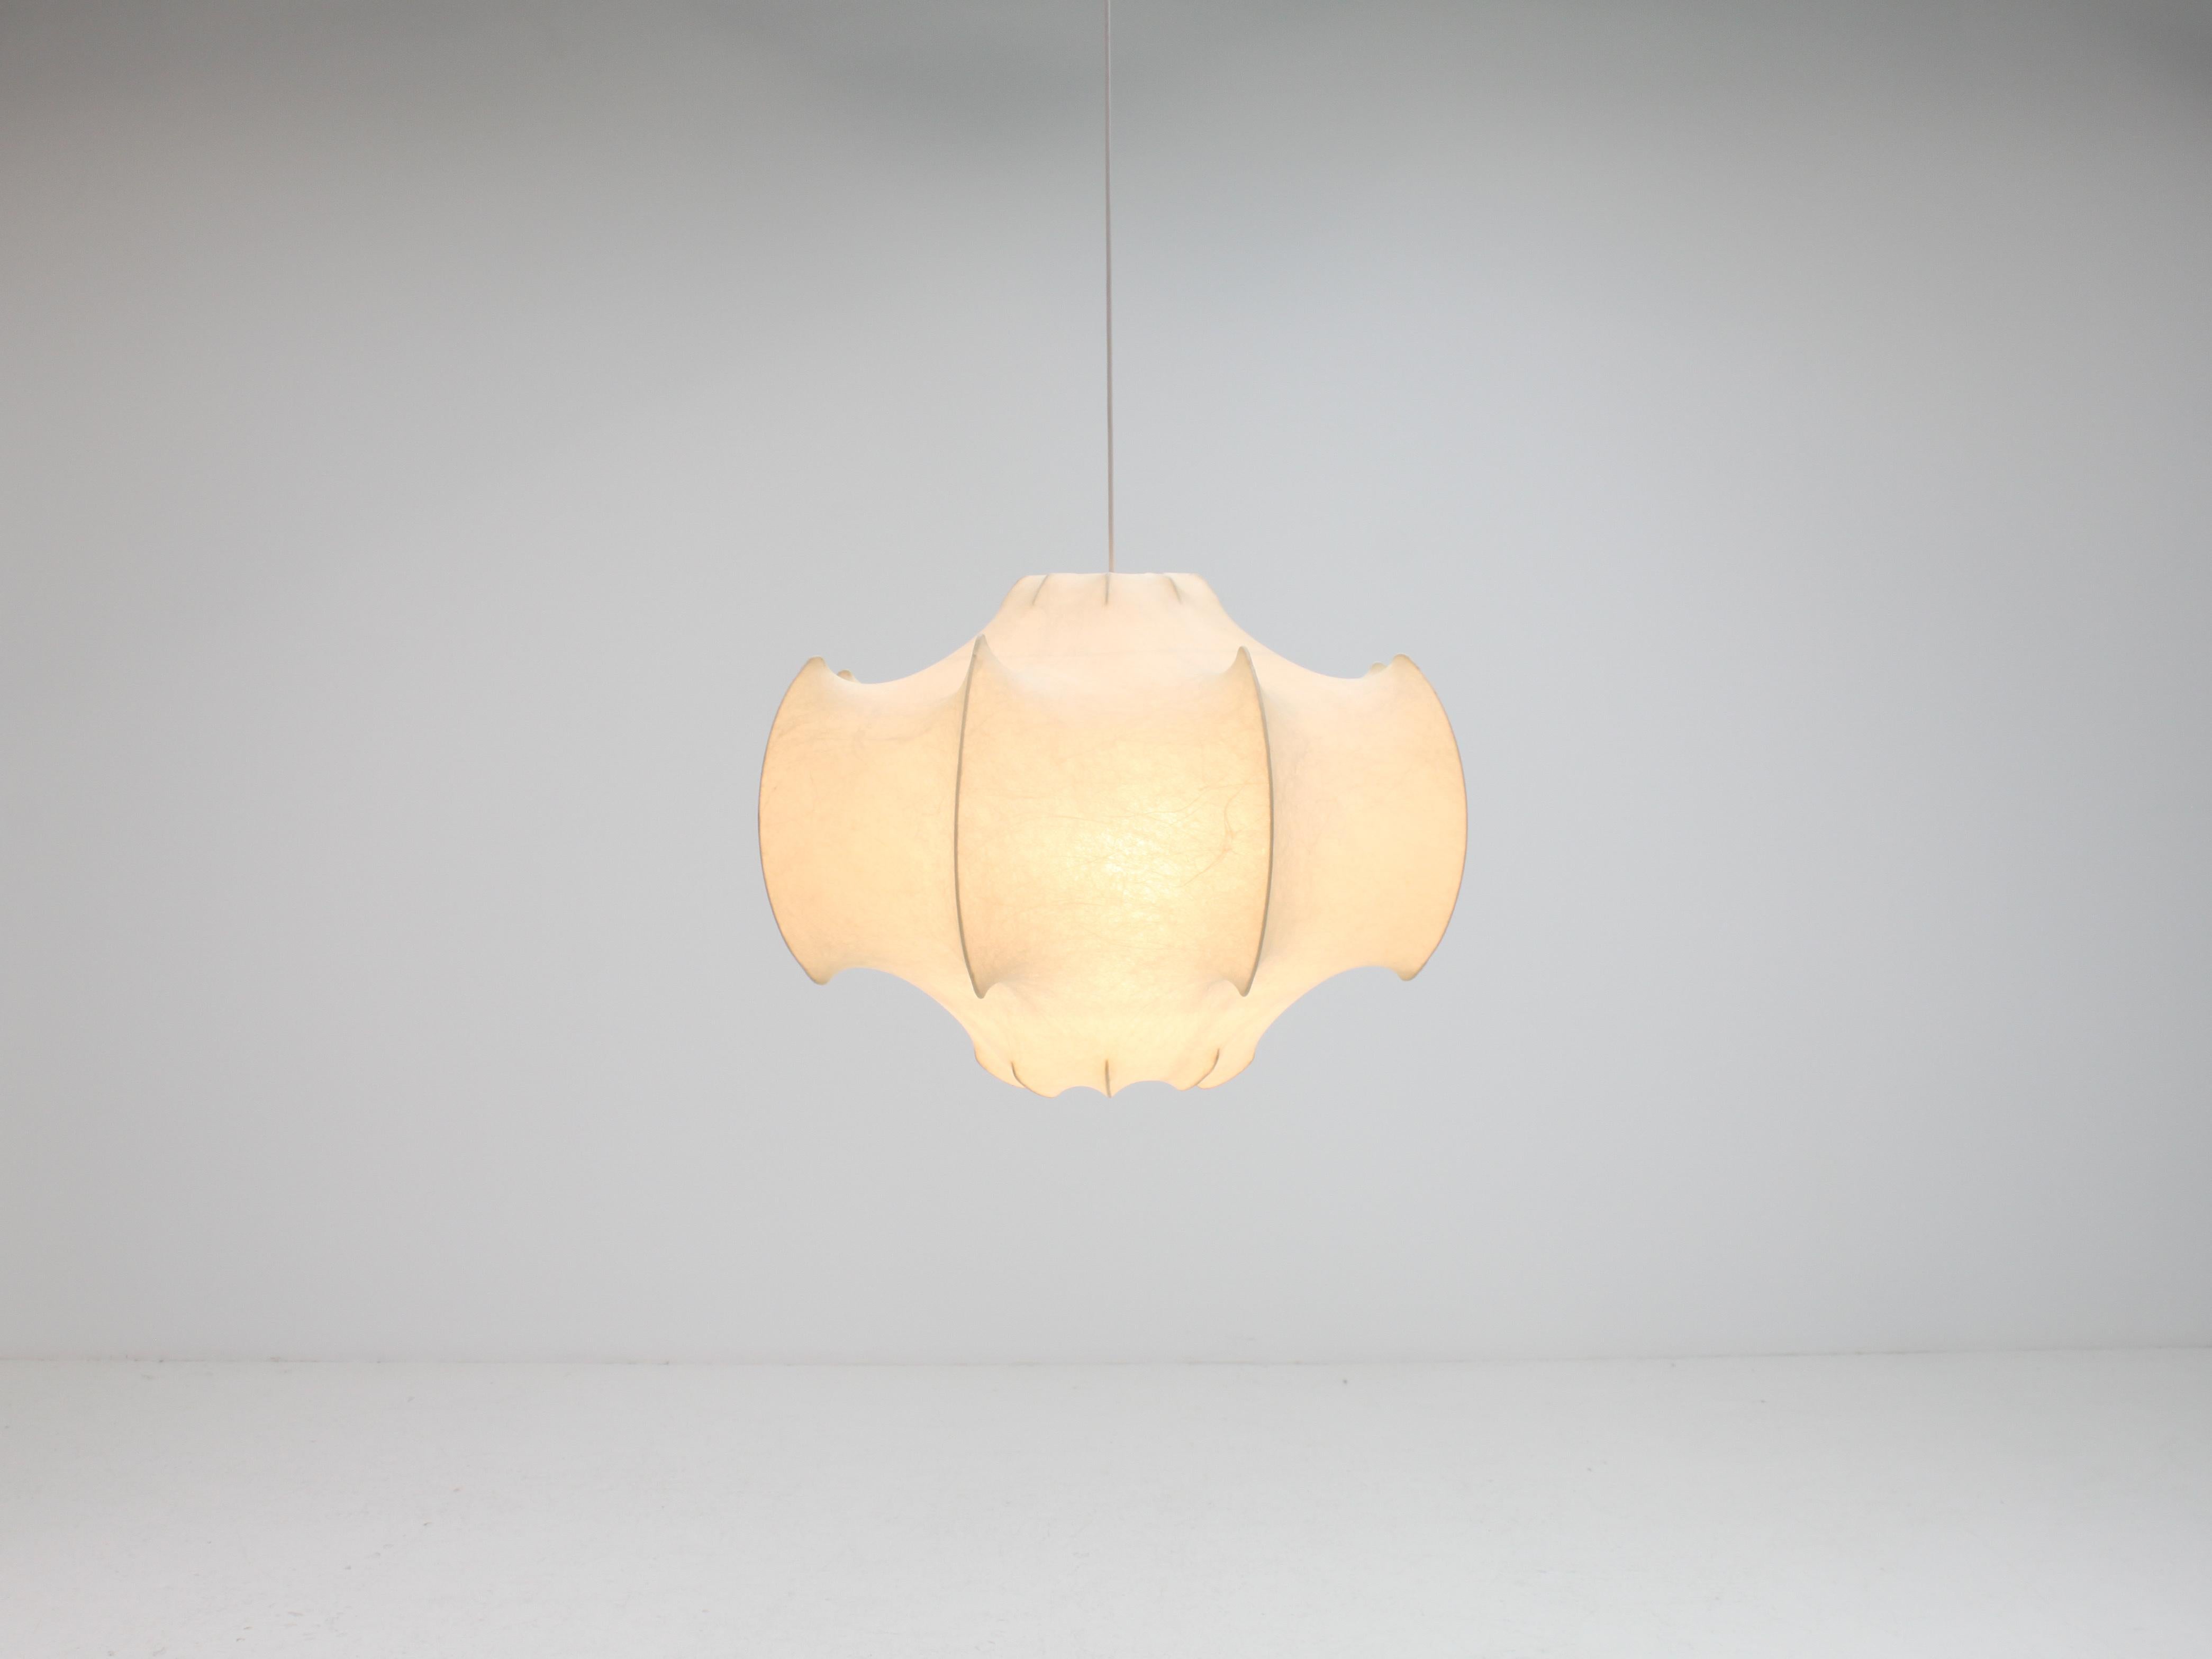 The Achille and Pier Giacomo Castiglioni designed Viscontea pendant used at the time a new spray-on coating polymer from the United States, called the “cocoon”.

Invented by the US military during the Second World War to protect shipments at sea